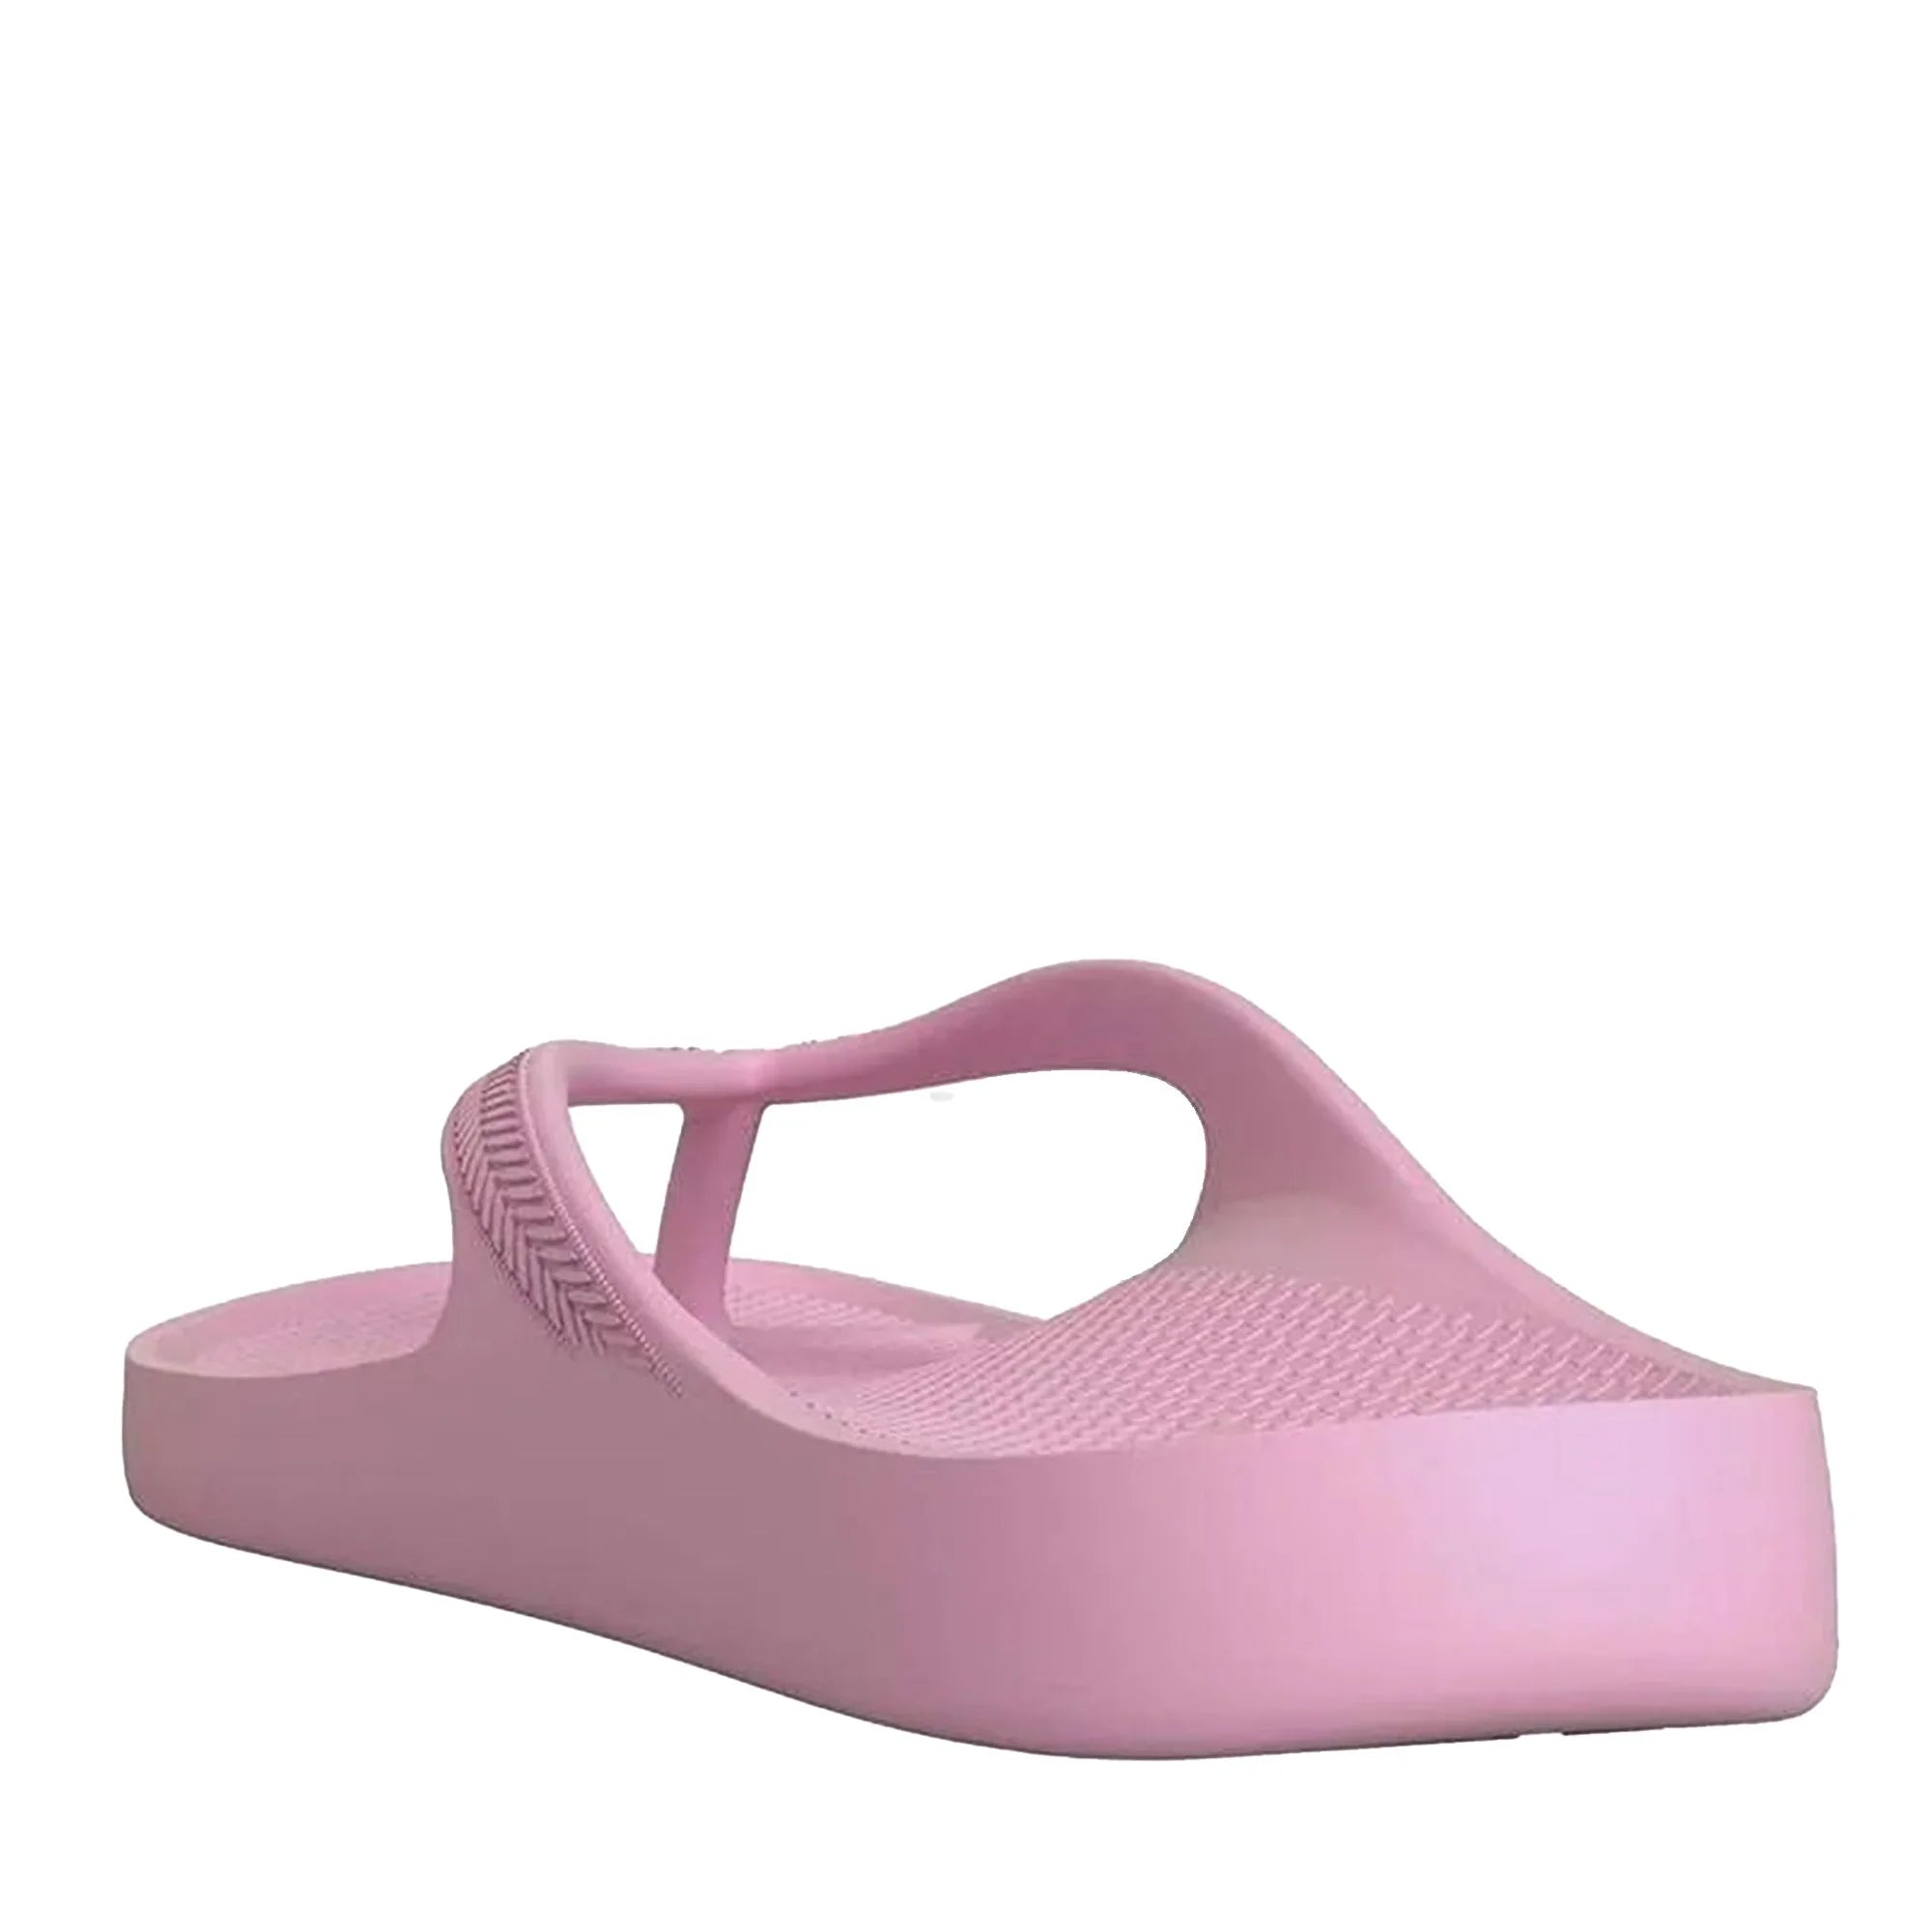 Soft Pink Arch Support Orthotic Unisex Thongs